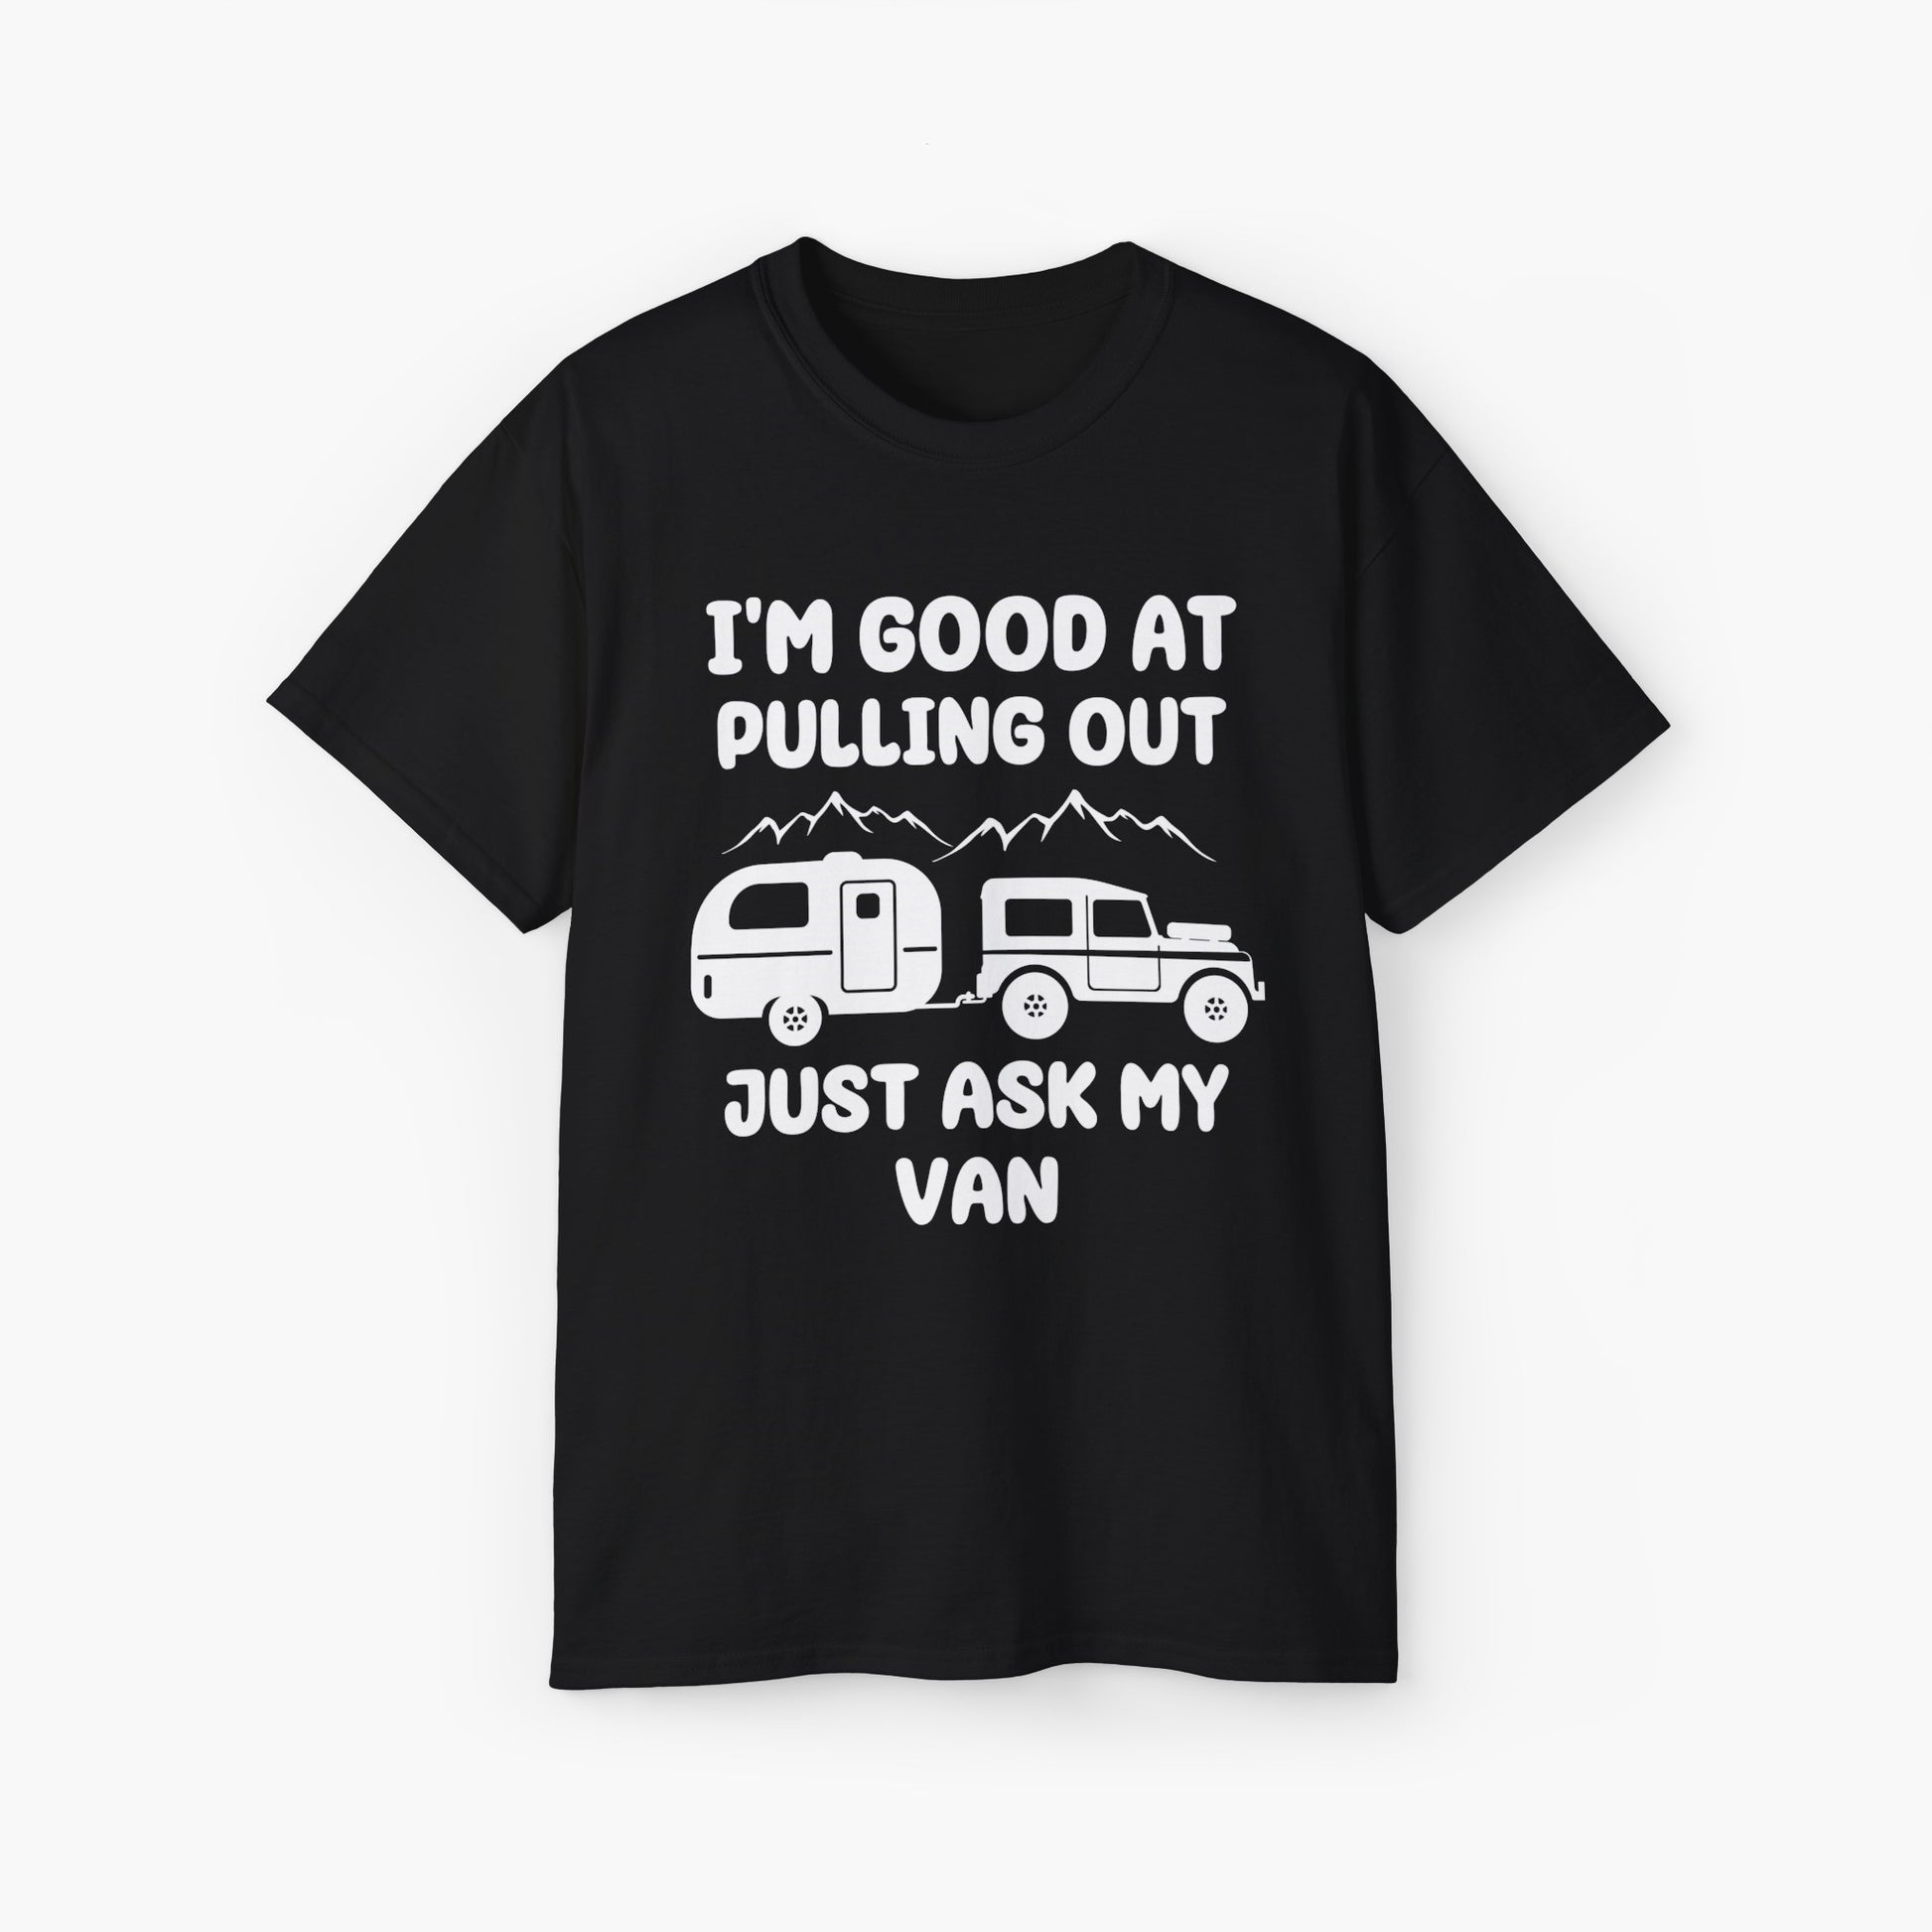 Black t-shirt with humorous text 'I'm good at pulling out, just ask my van,' featuring an image of a truck pulling a camping van, set against mountains on a plain background.